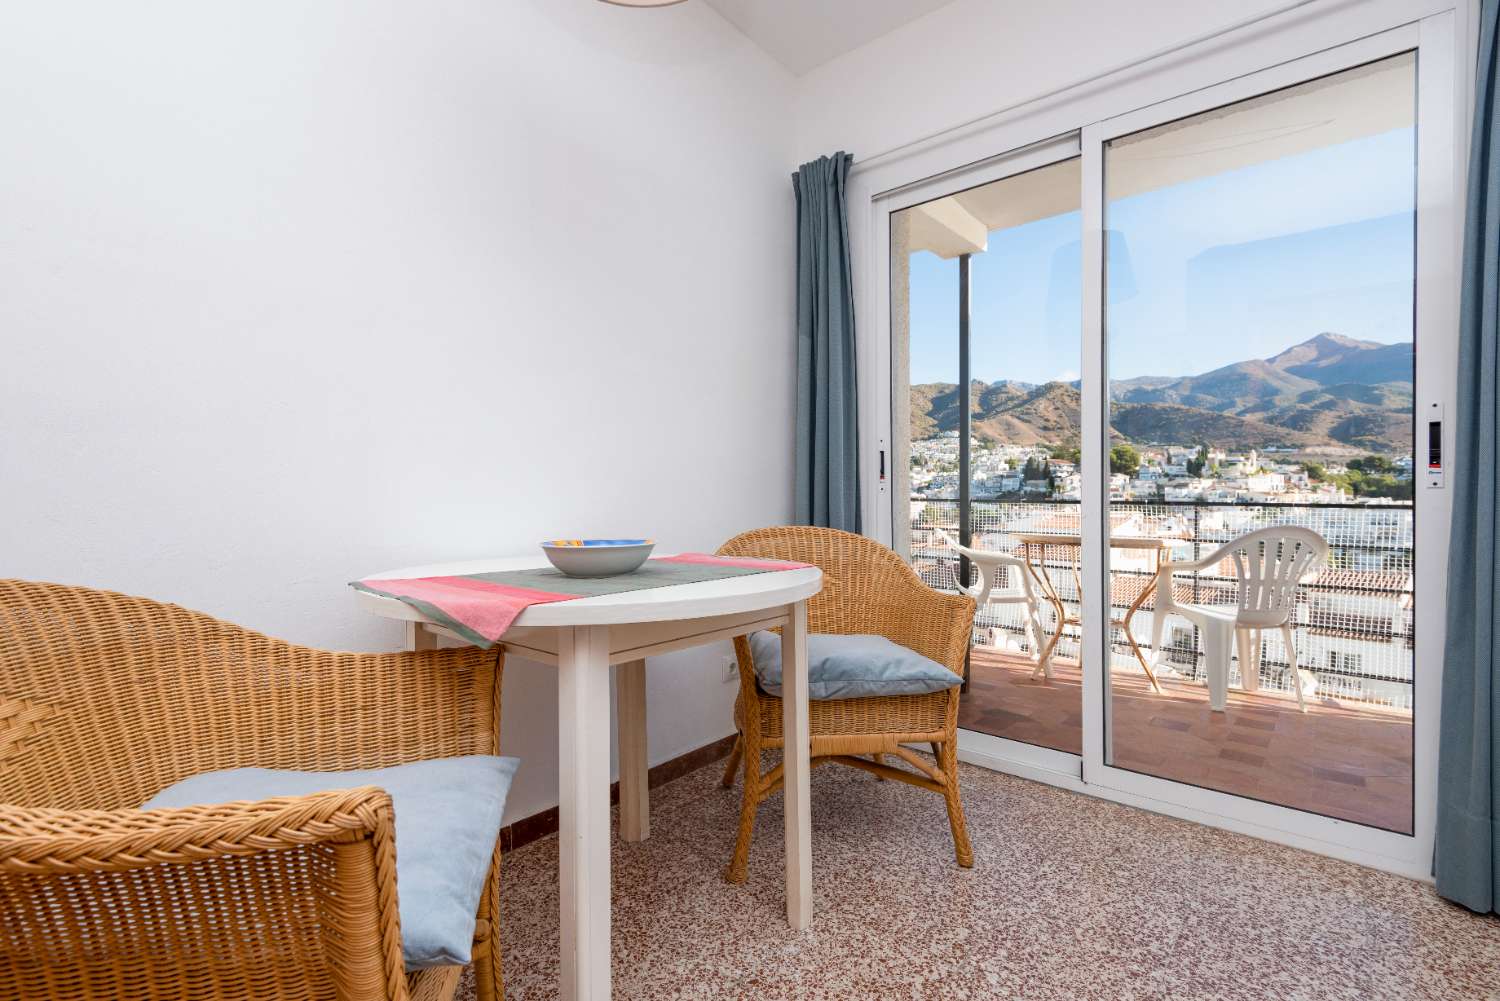 Apartment with sea views near Burriana beach and the Hotel Parador in Nerja